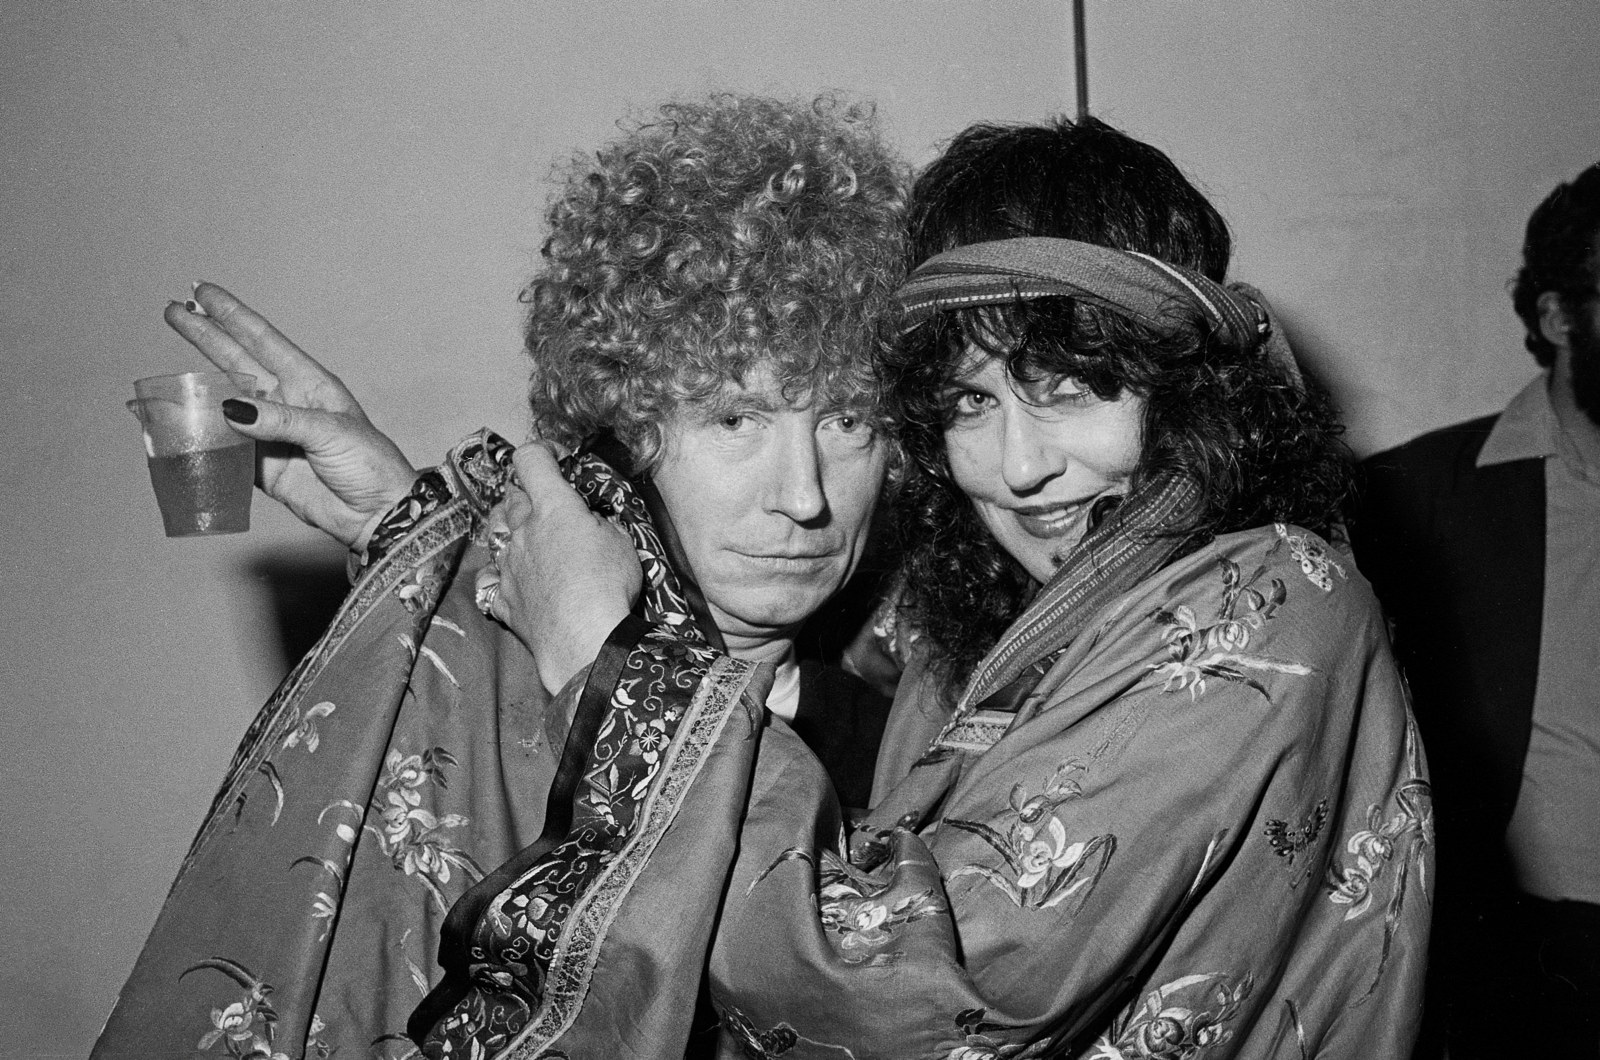 Man with curly hair being hugged by woman with headscarf holding drink and cigarette.